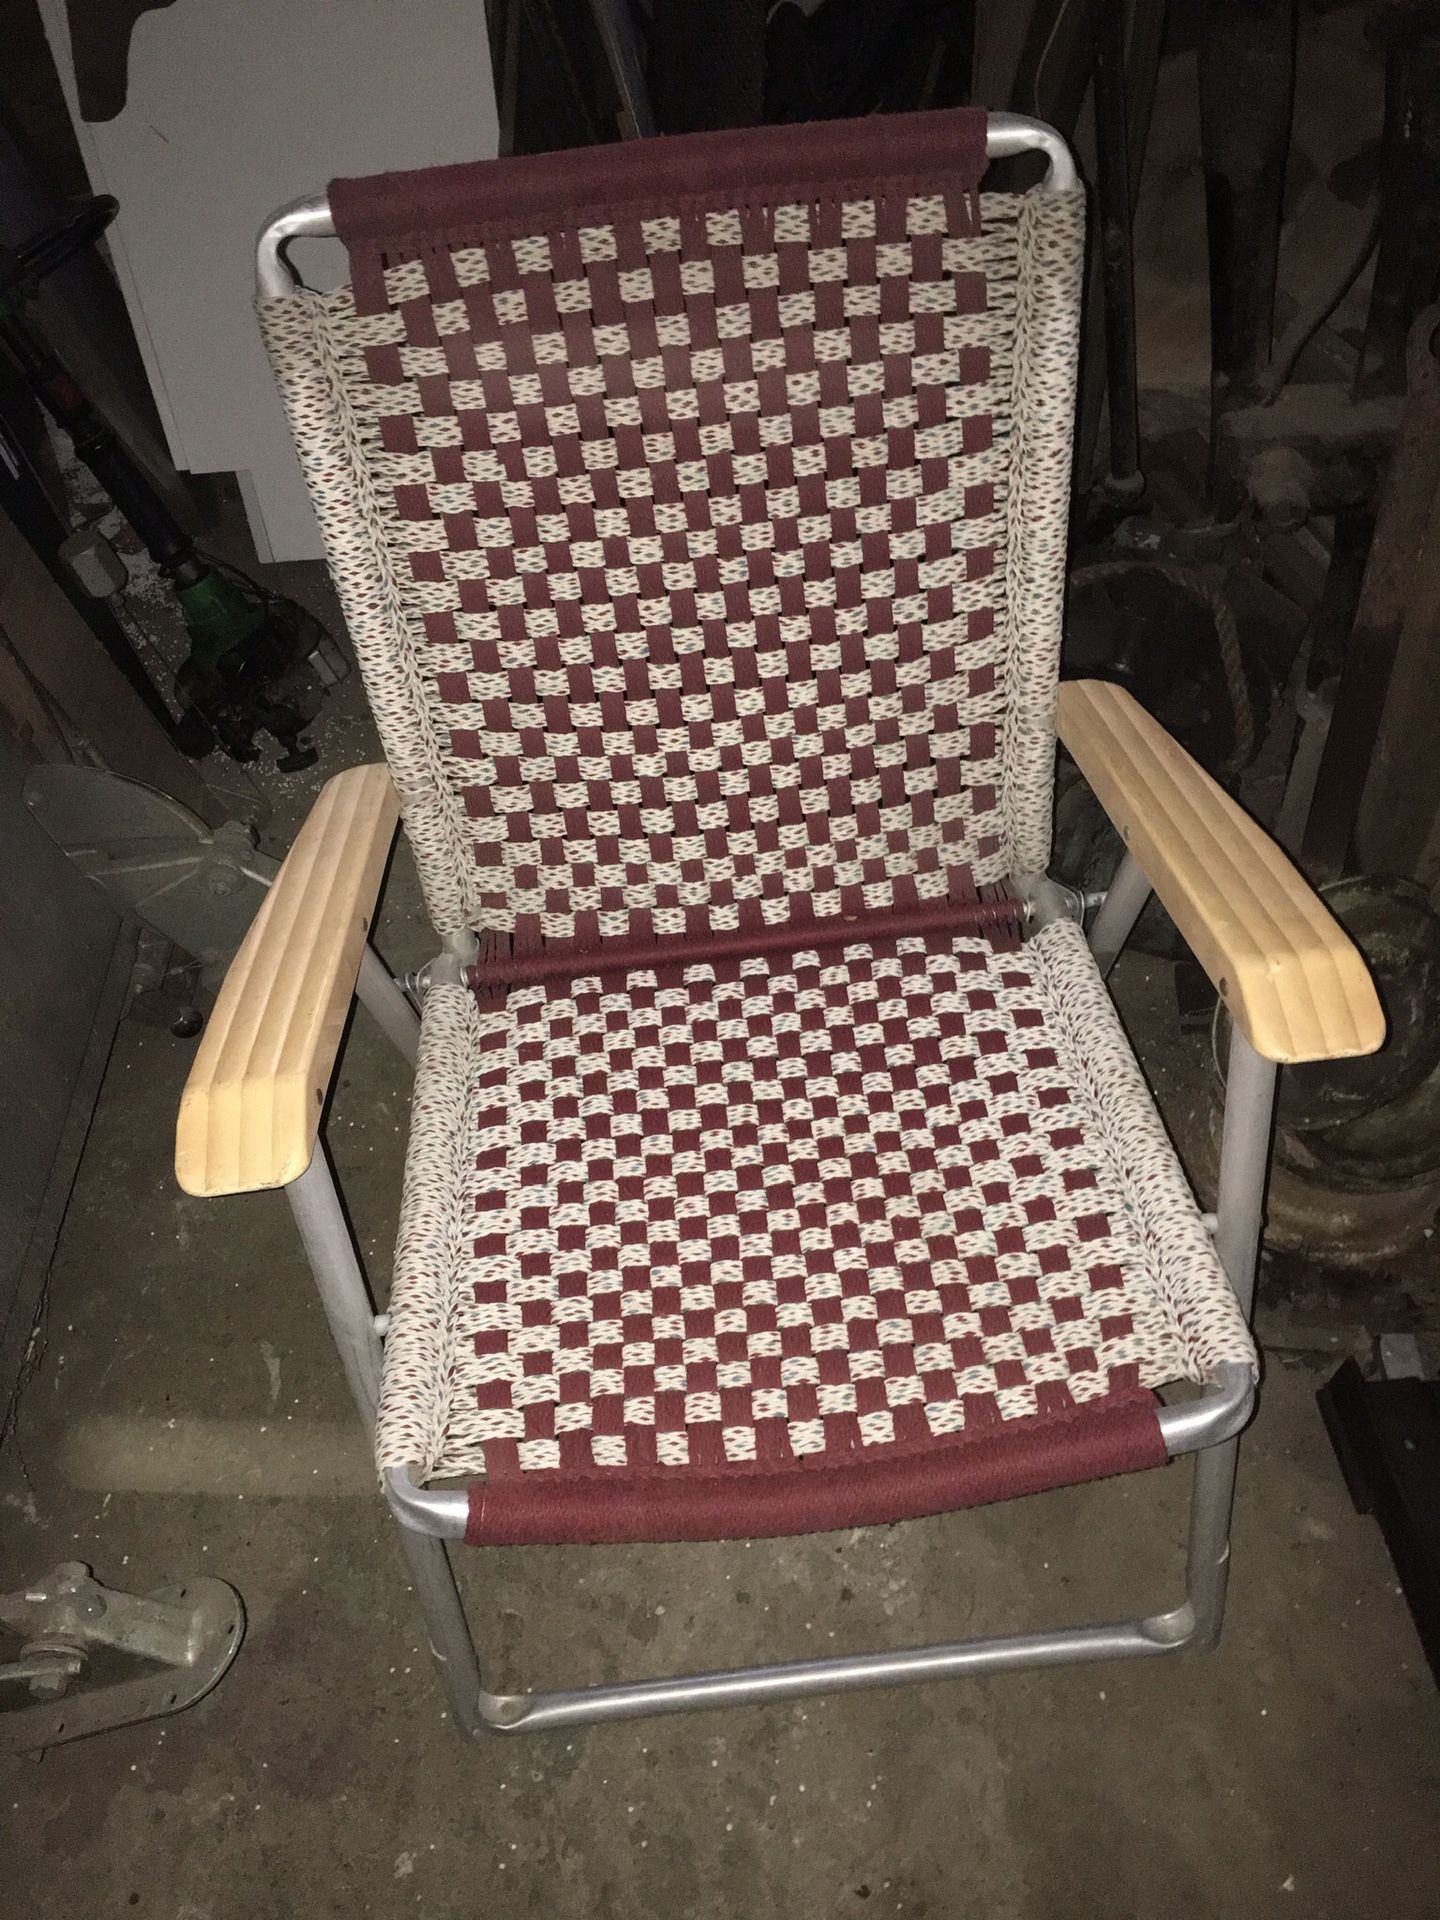 Hand woven lawn chairs